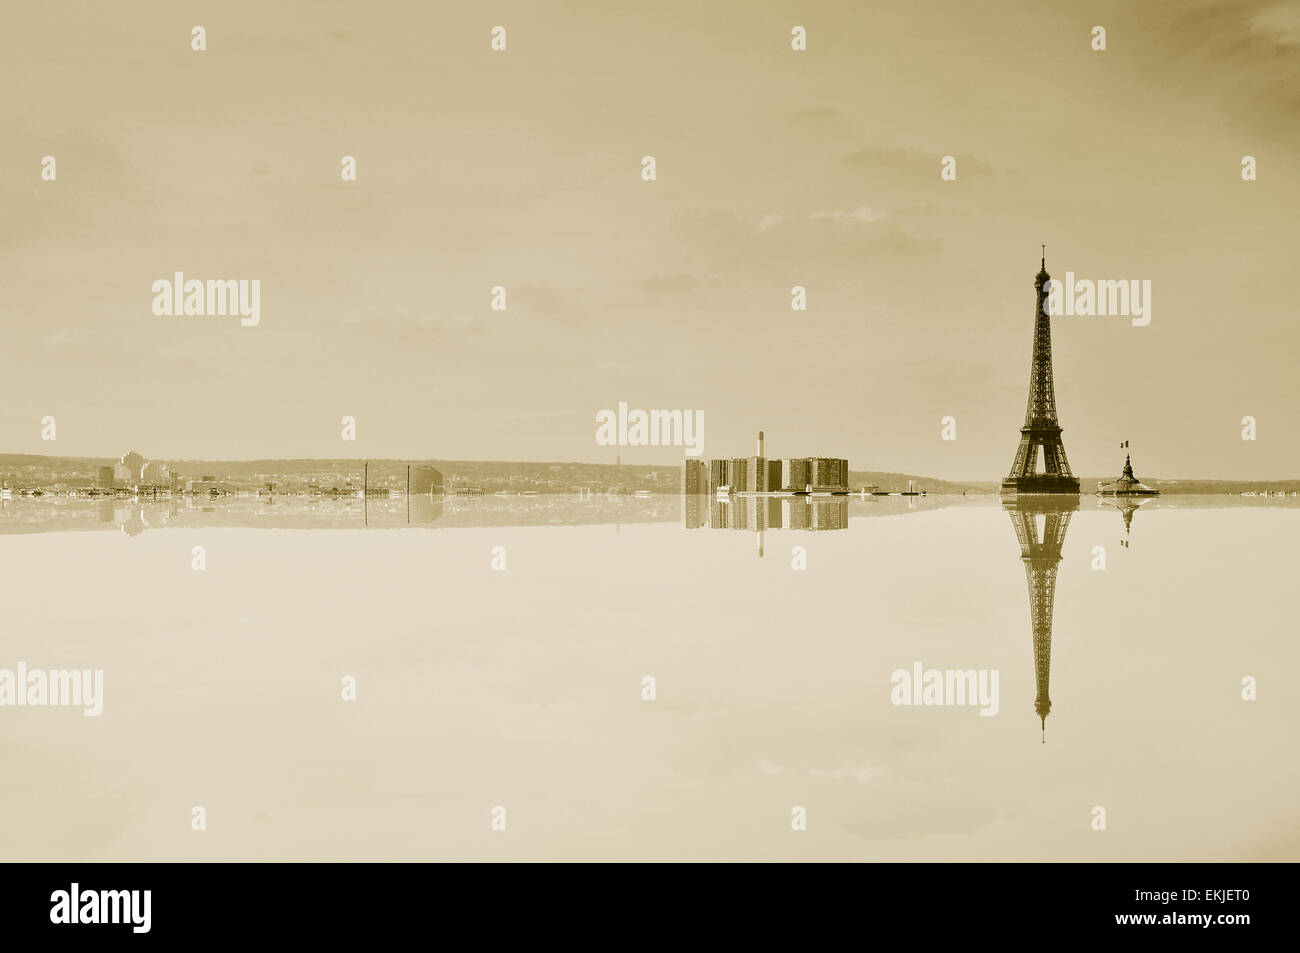 skyline of Paris, France, with the Eiffel Tower in the background with reflection, in sepia toning Stock Photo